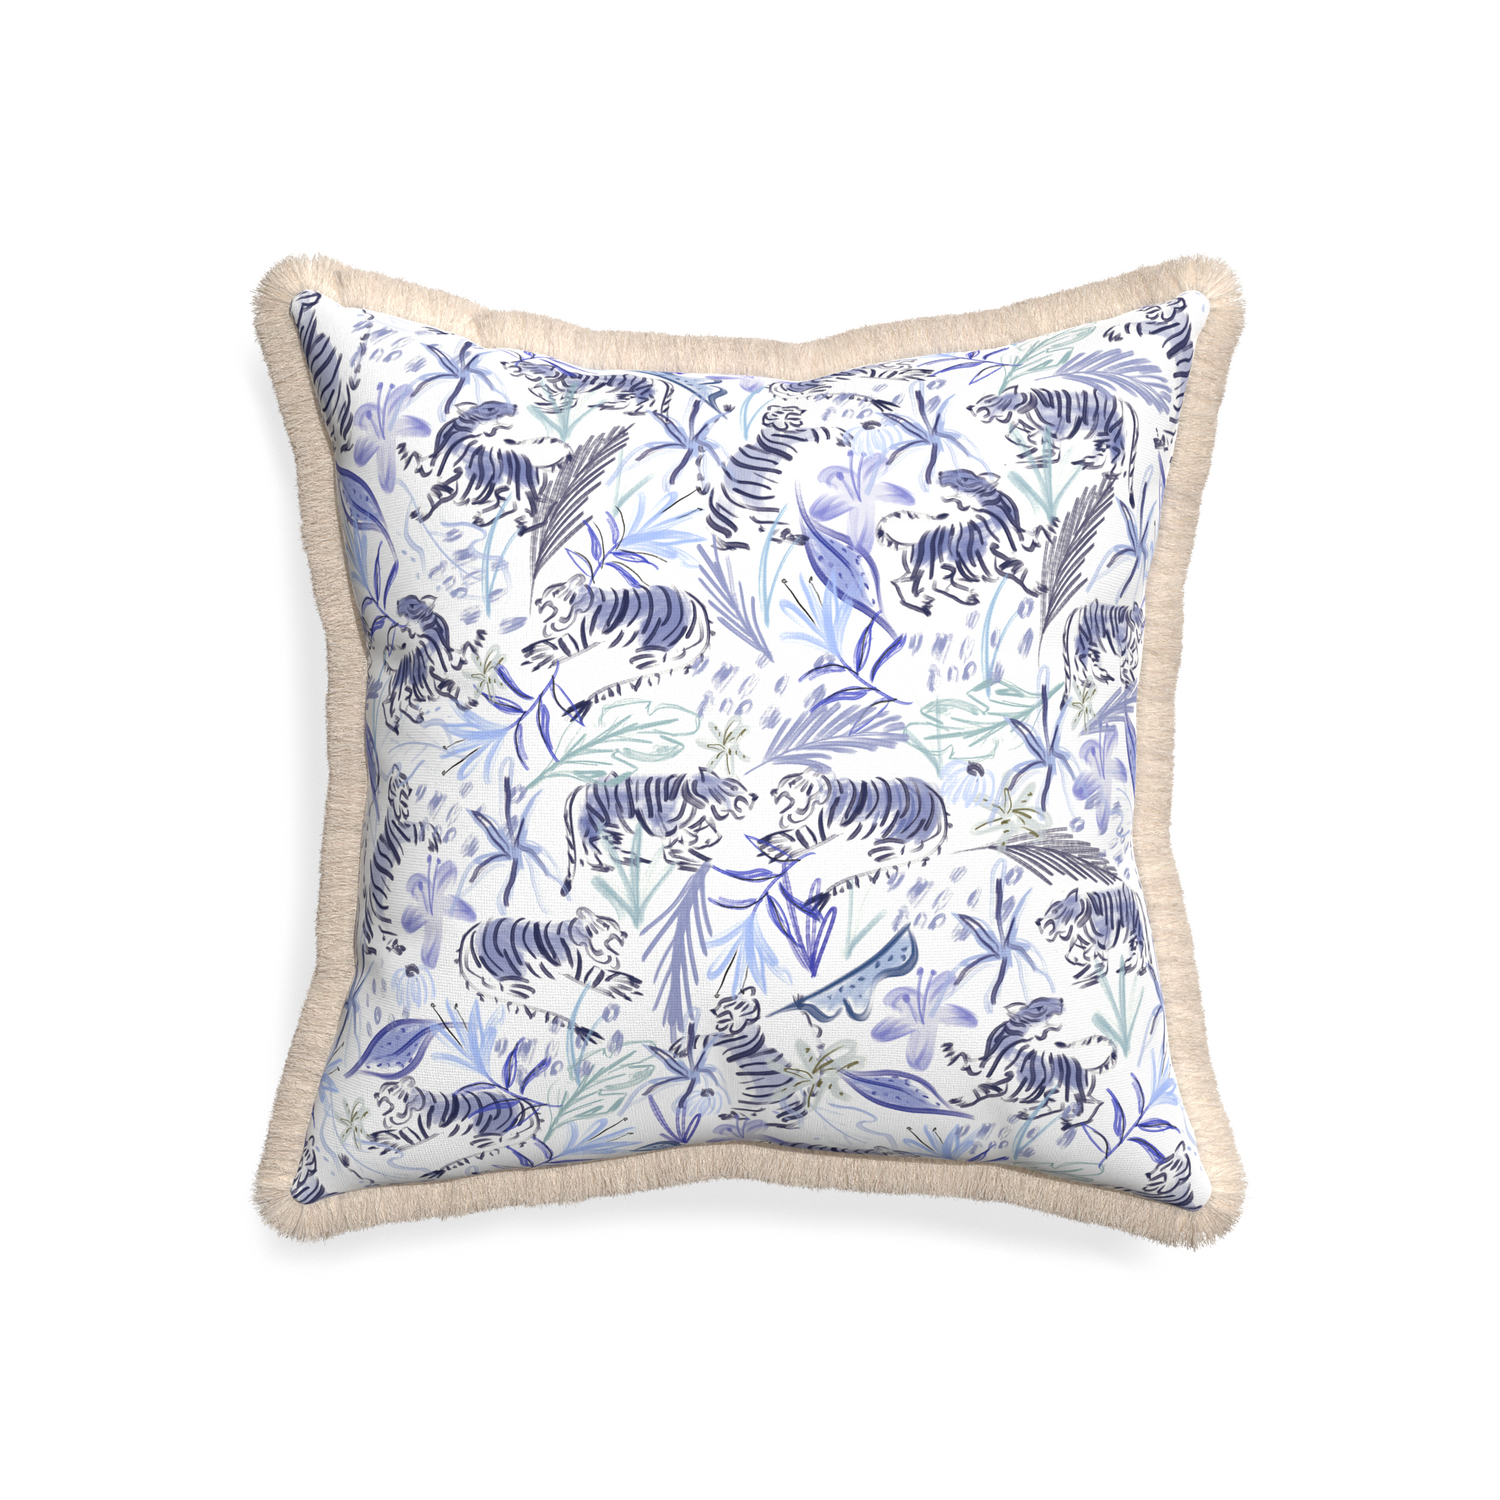 20-square frida blue custom blue with intricate tiger designpillow with cream fringe on white background